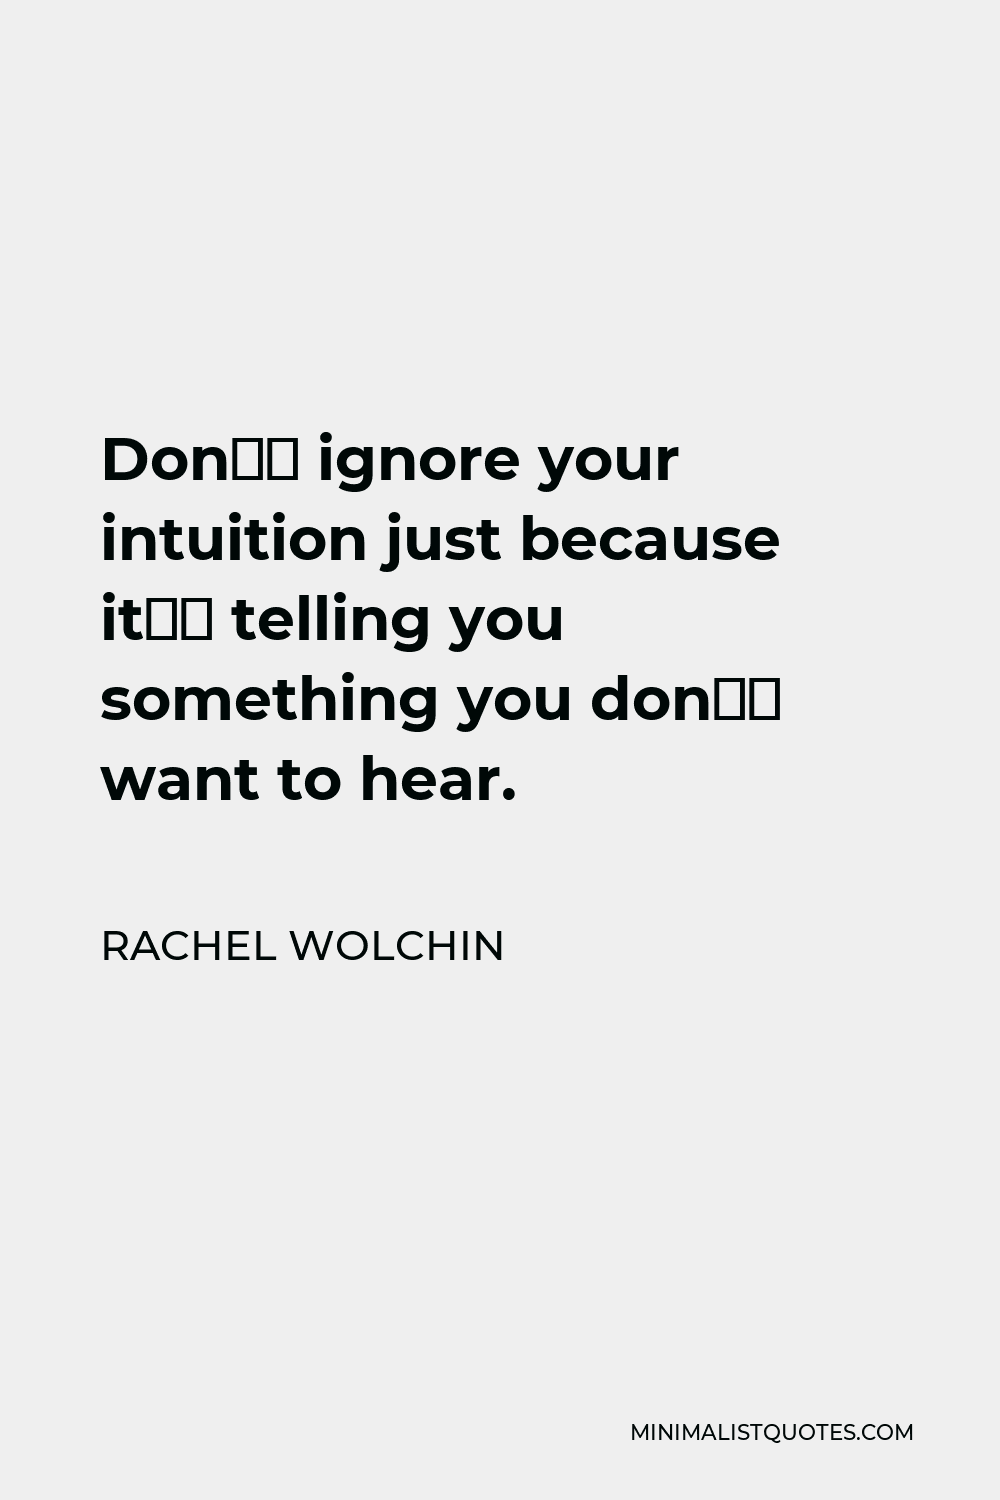 Rachel Wolchin Quote - Don’t ignore your intuition just because it’s telling you something you don’t want to hear.